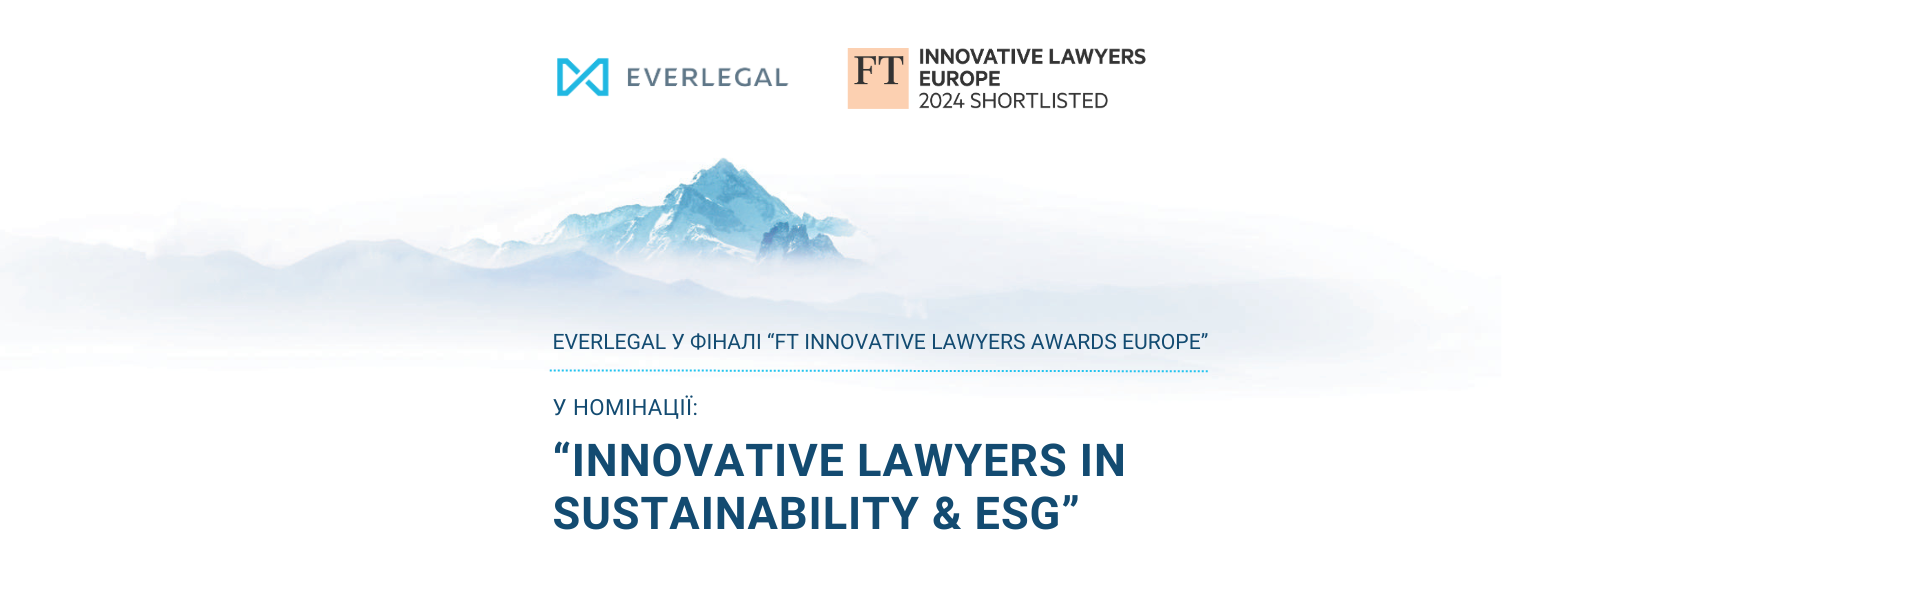 EVERLEGAL shortlisted for FT Innovative Lawyers 2024